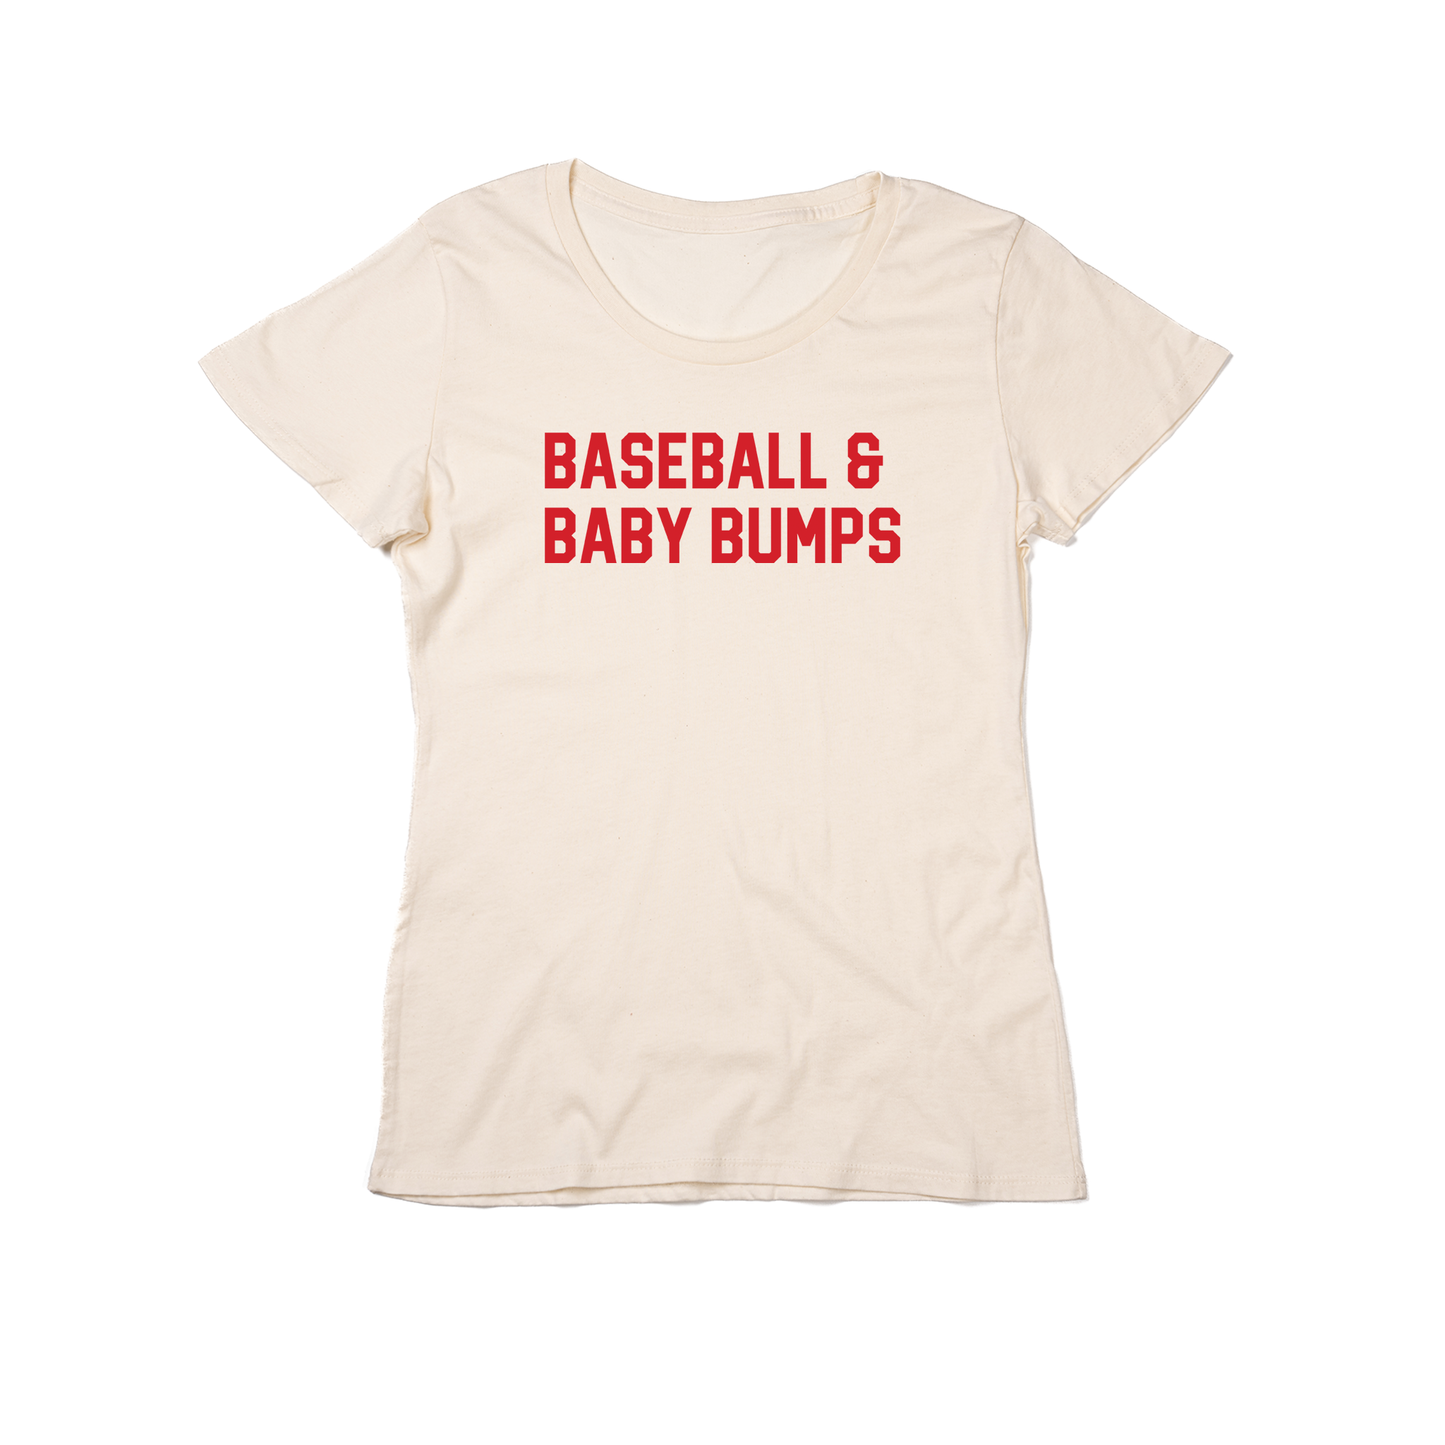 Baseball & Baby Bumps (Red) - Women's Fitted Tee (Natural)